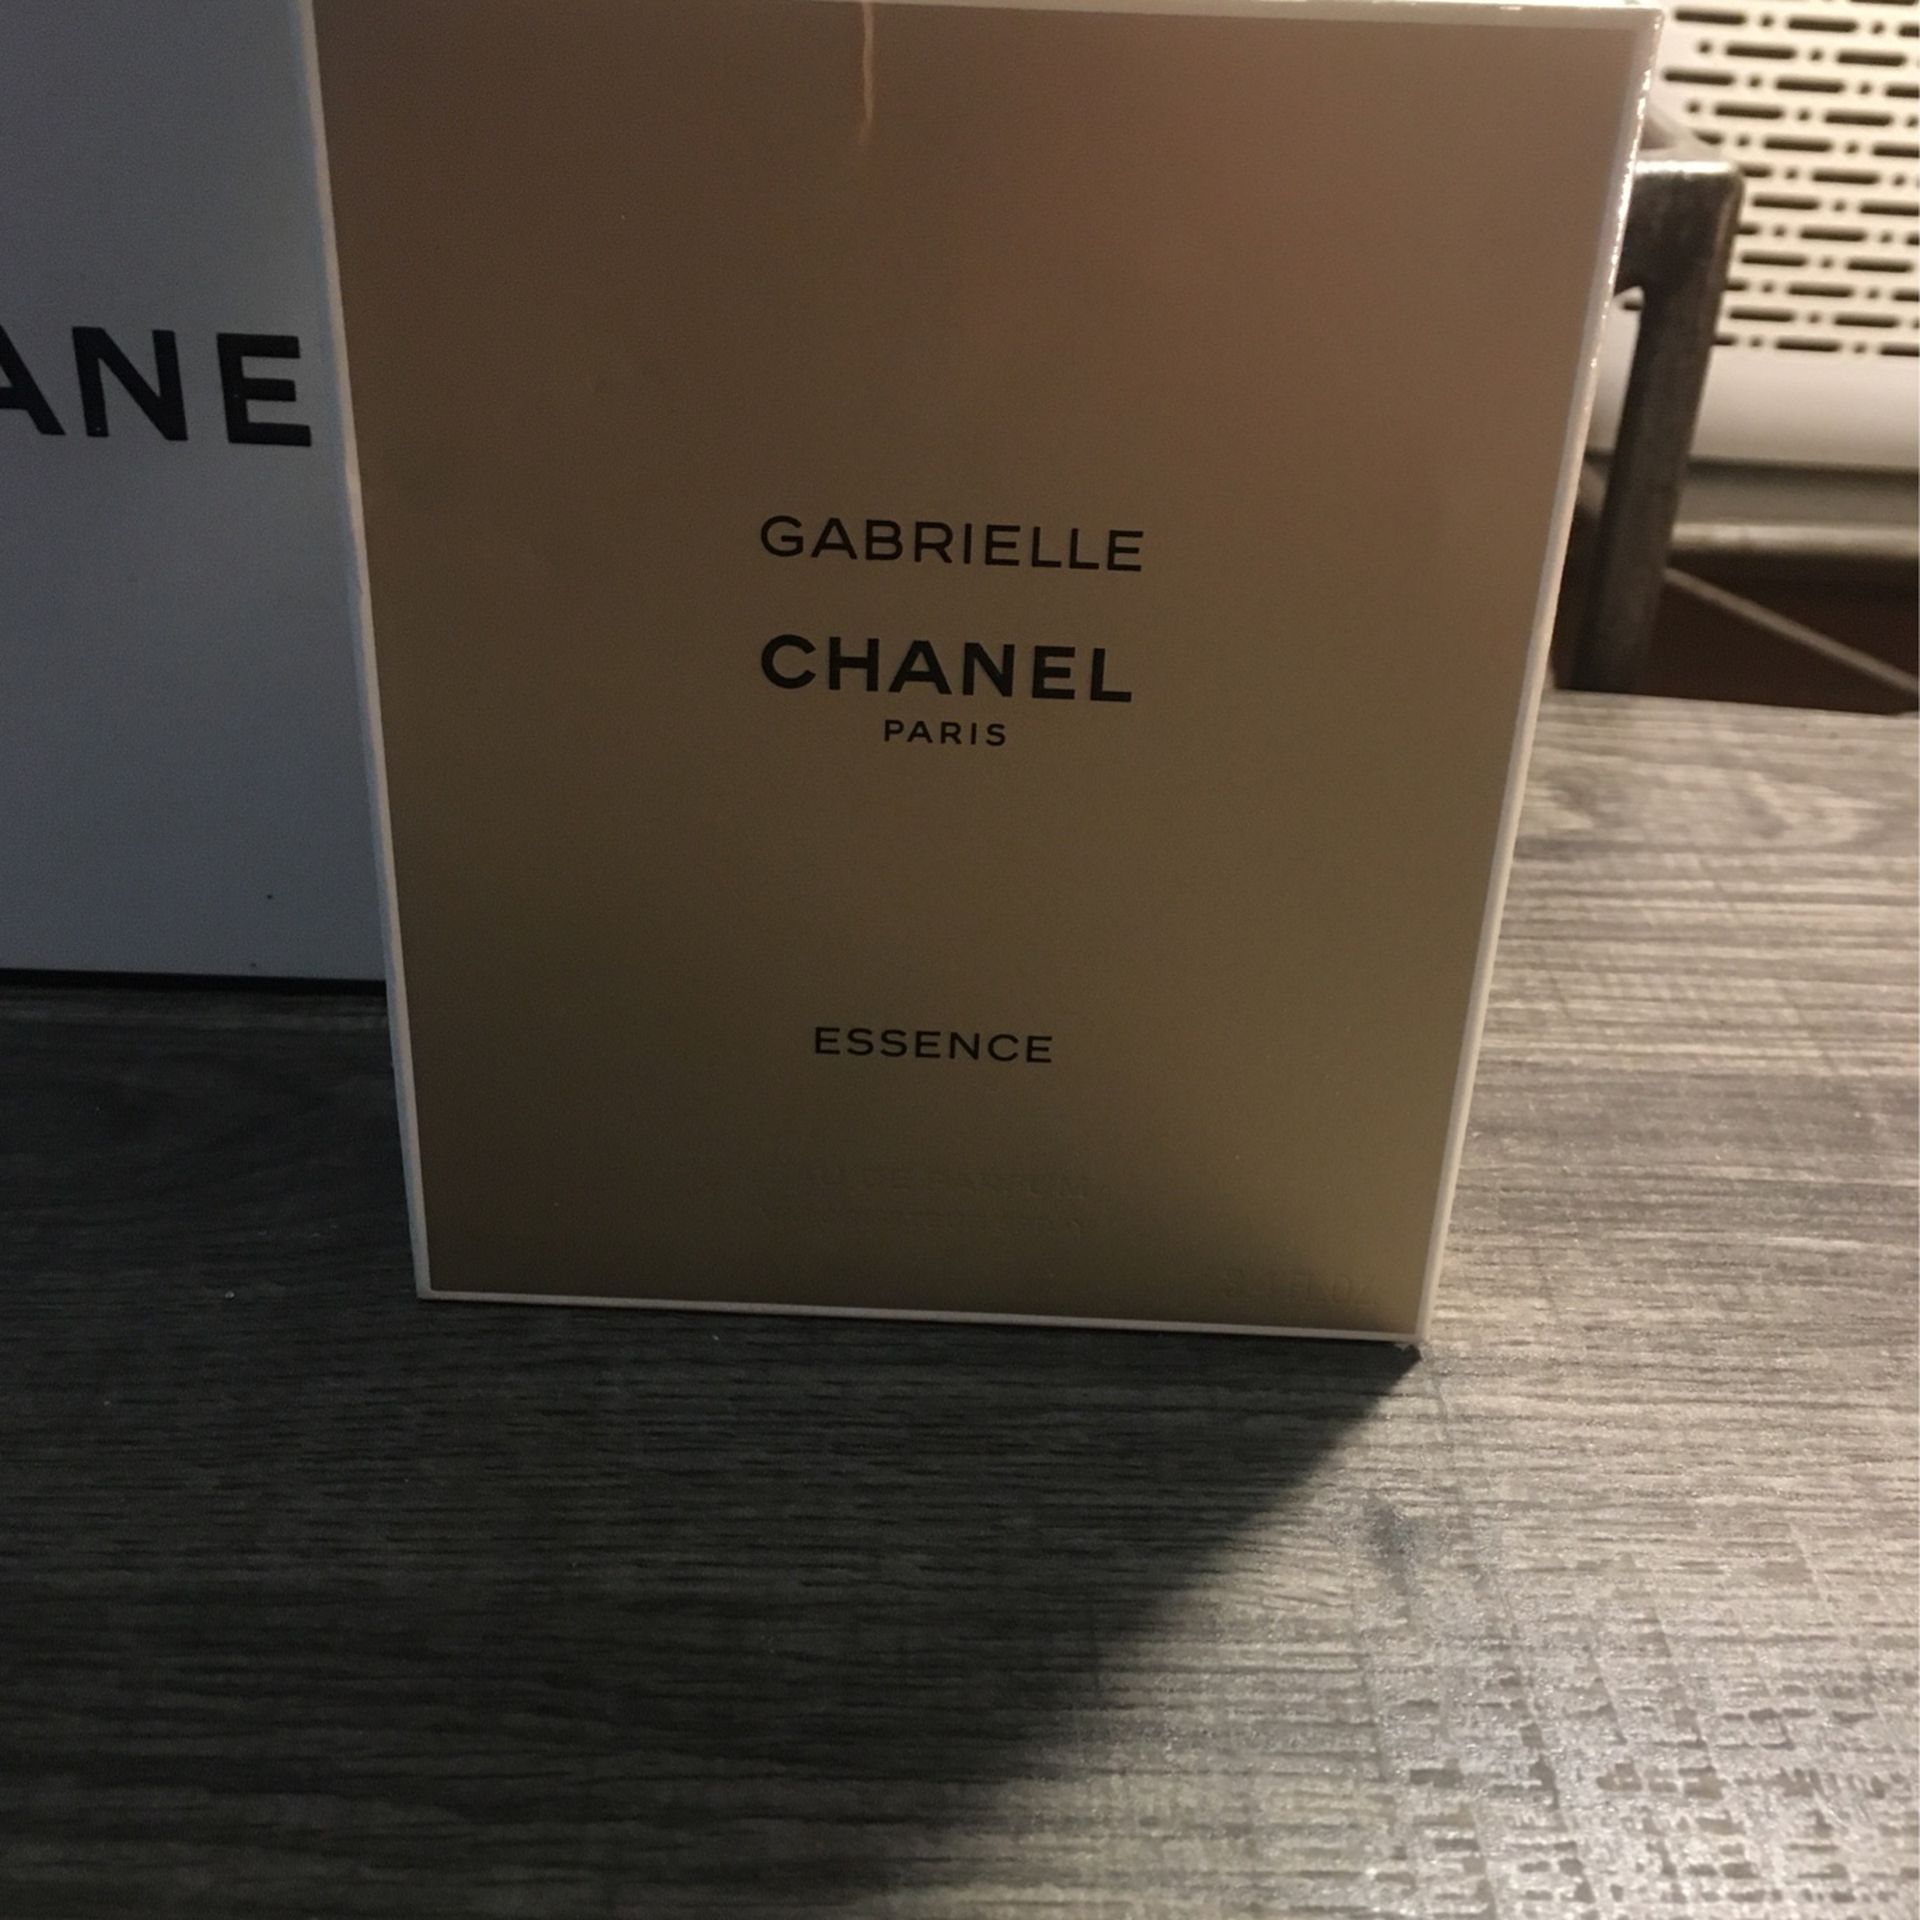 New Chanel Authentic Gabrielle Chanel Paris Perfume Full Size 100 Ml  With Box $115 C My Deals Ty